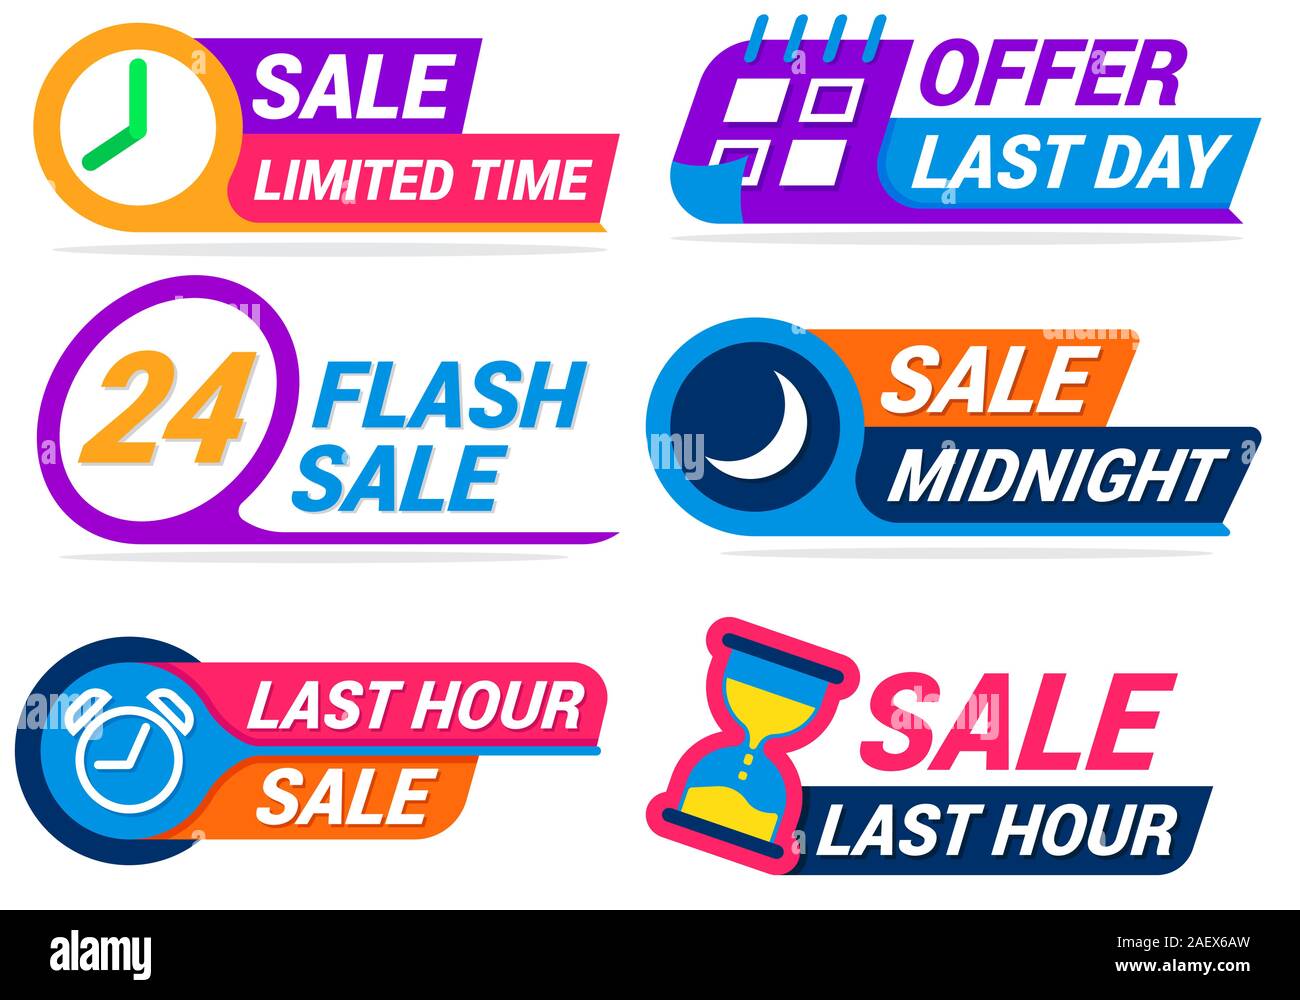 limited time sale banner Stock Vector